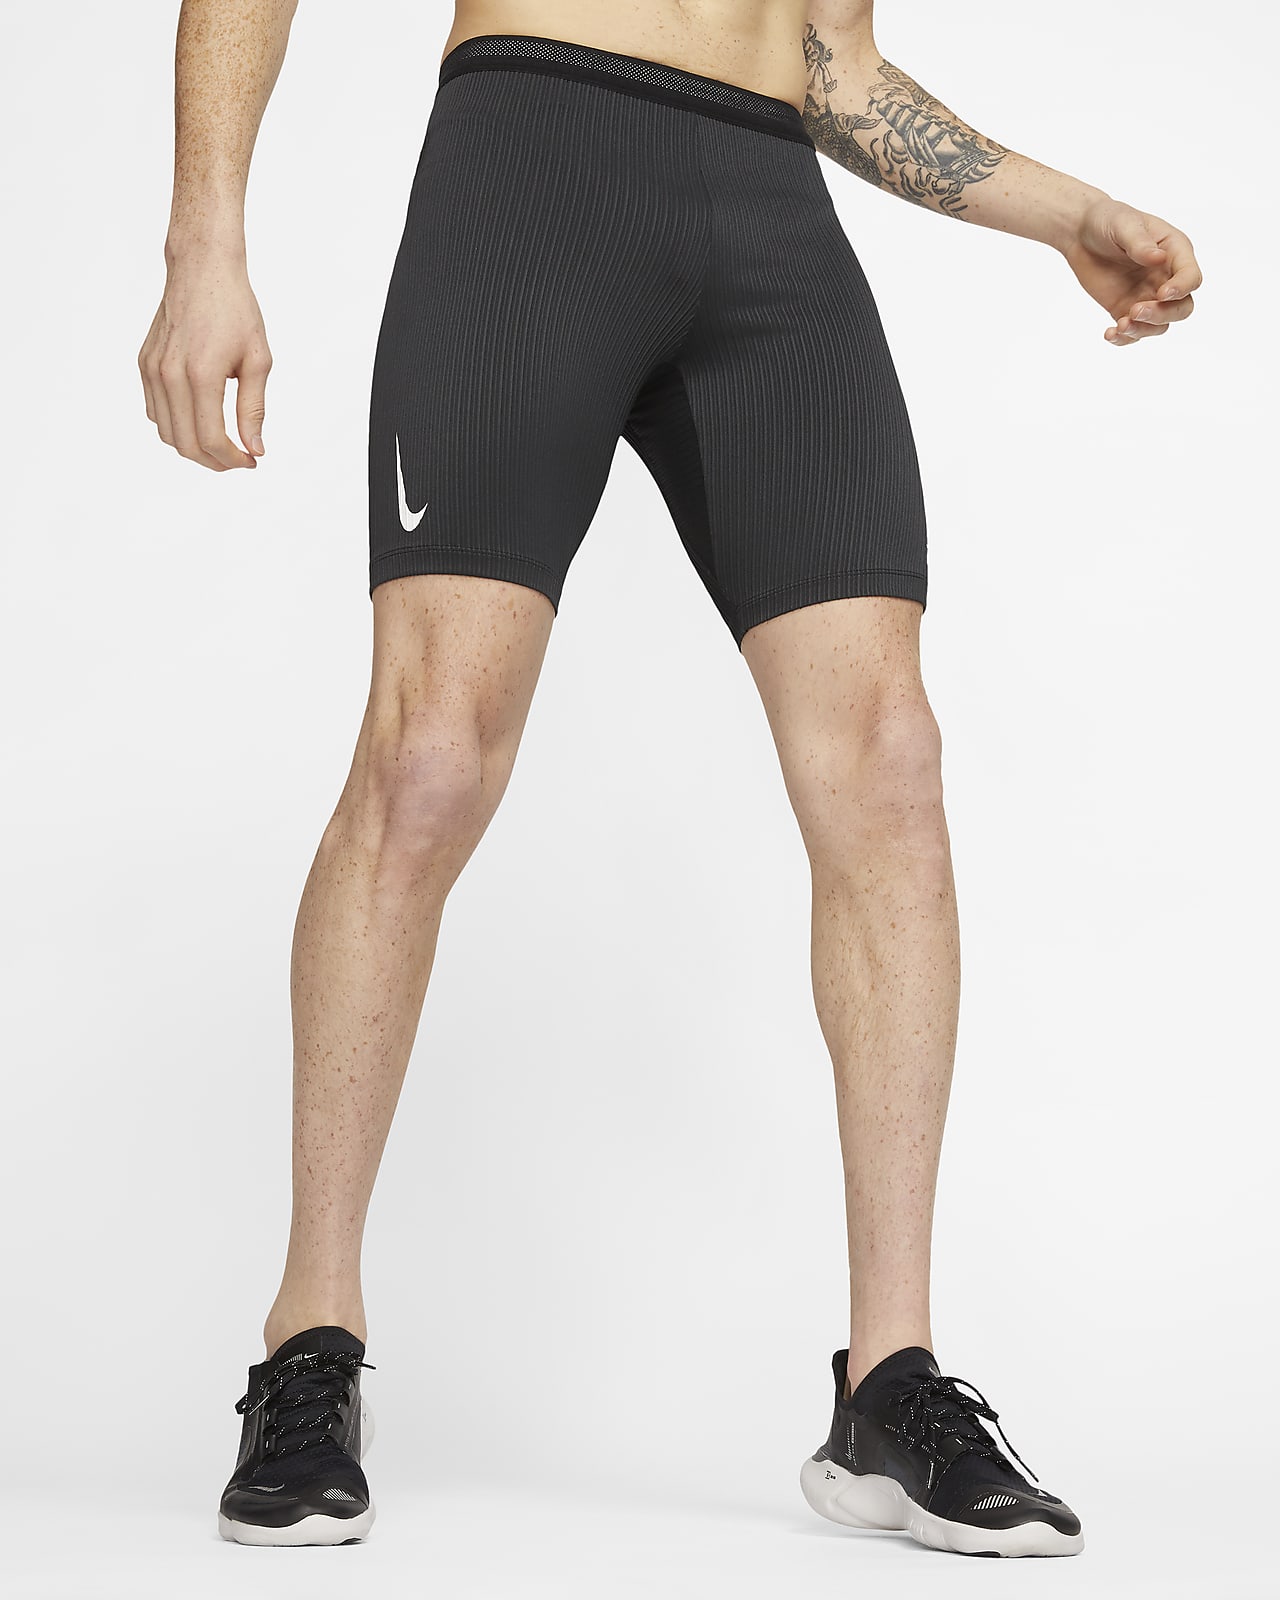 nike shorts with tights